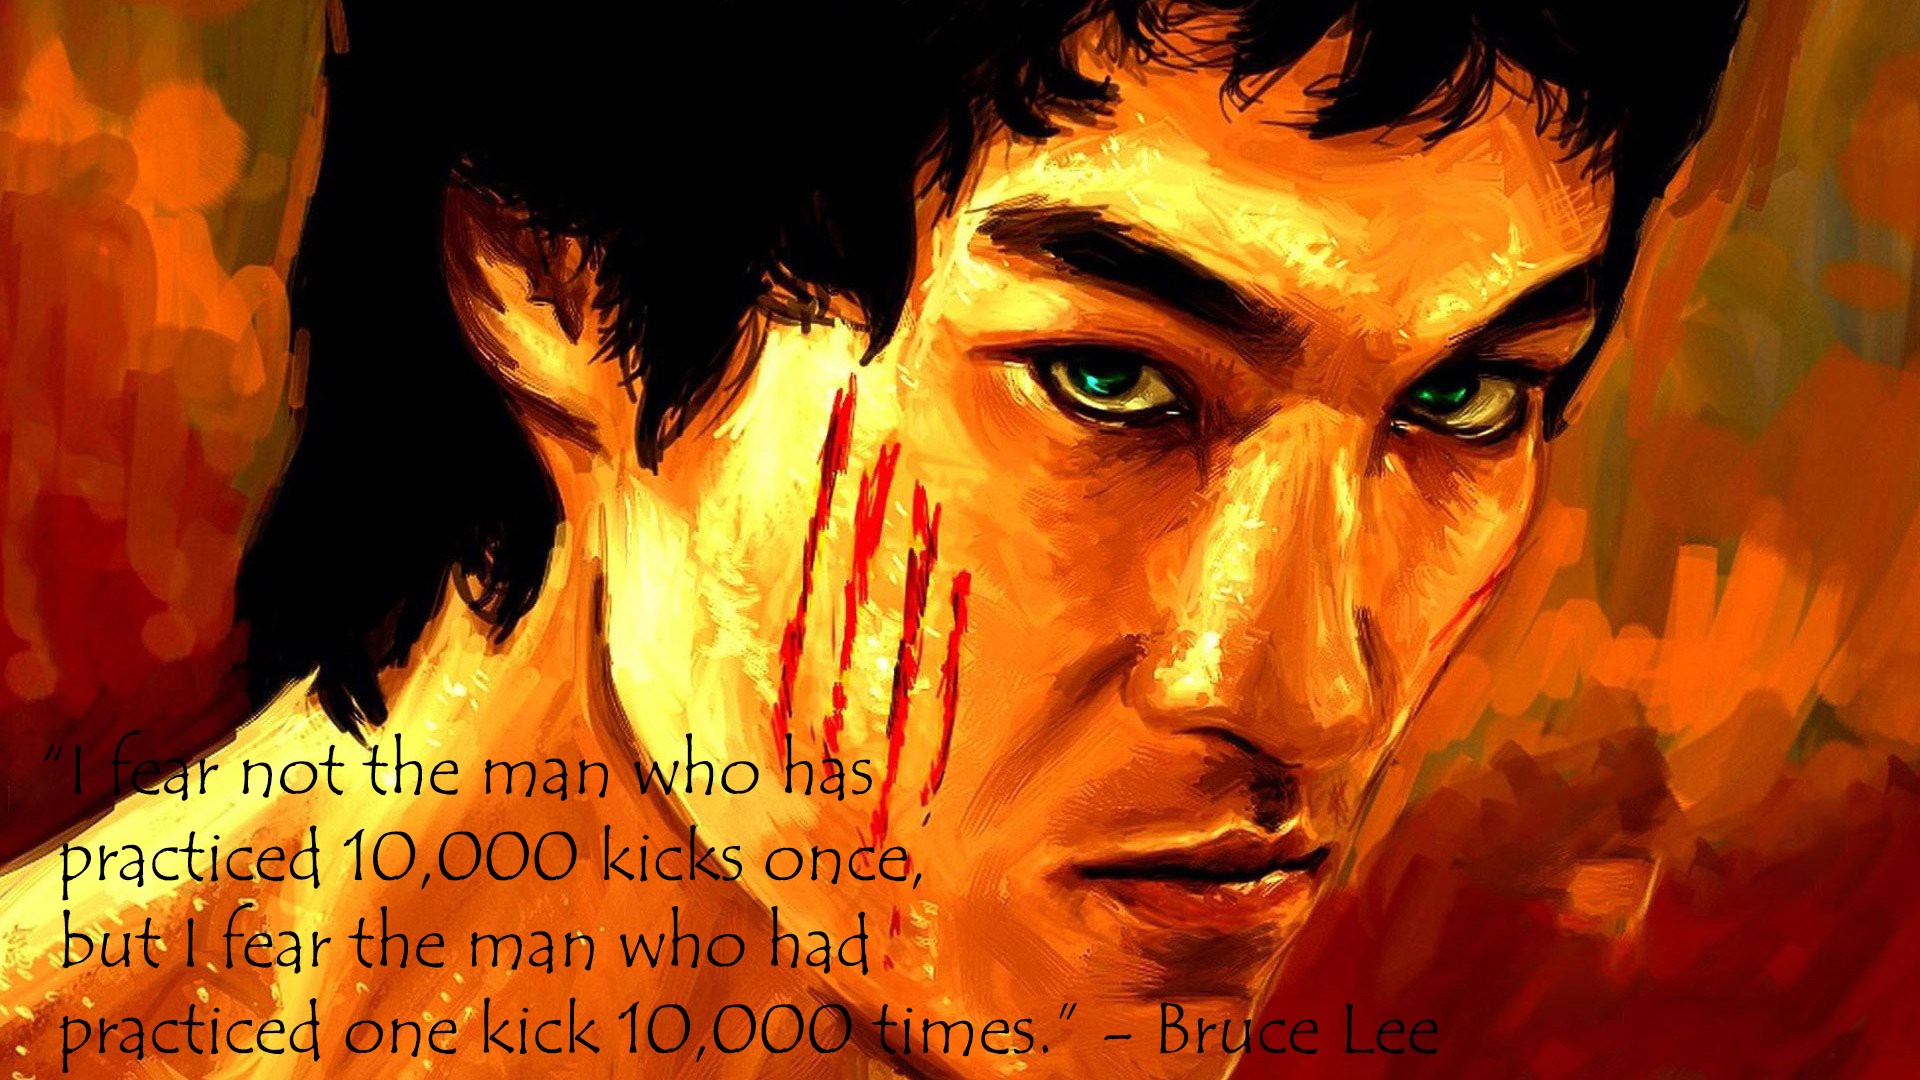 Bruce Lee, Quote Wallpaper